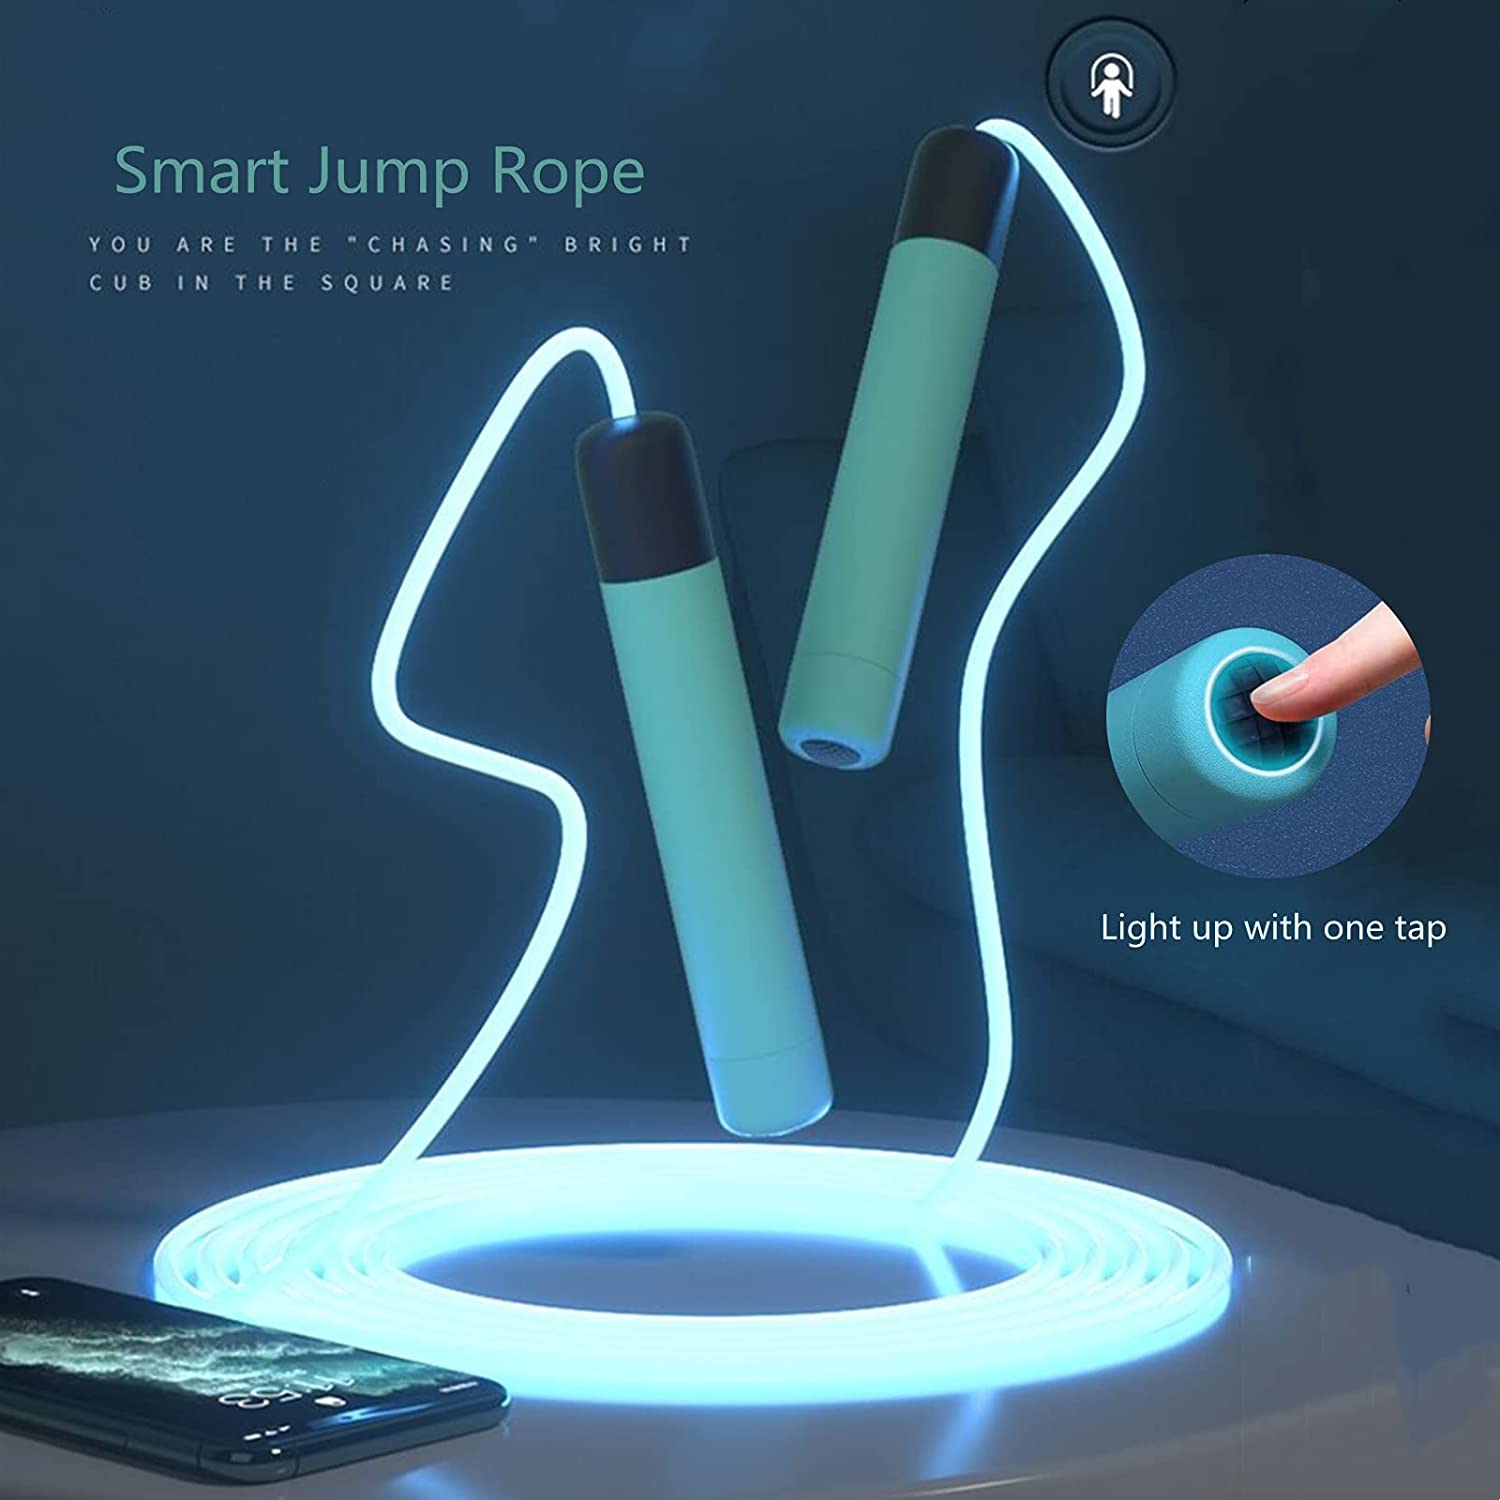 Jump Ropes Skipping Rope for Kids Develop Children's Sports Interest Men Women Fitness Exercise Indoors Outdoors Cool LED Light